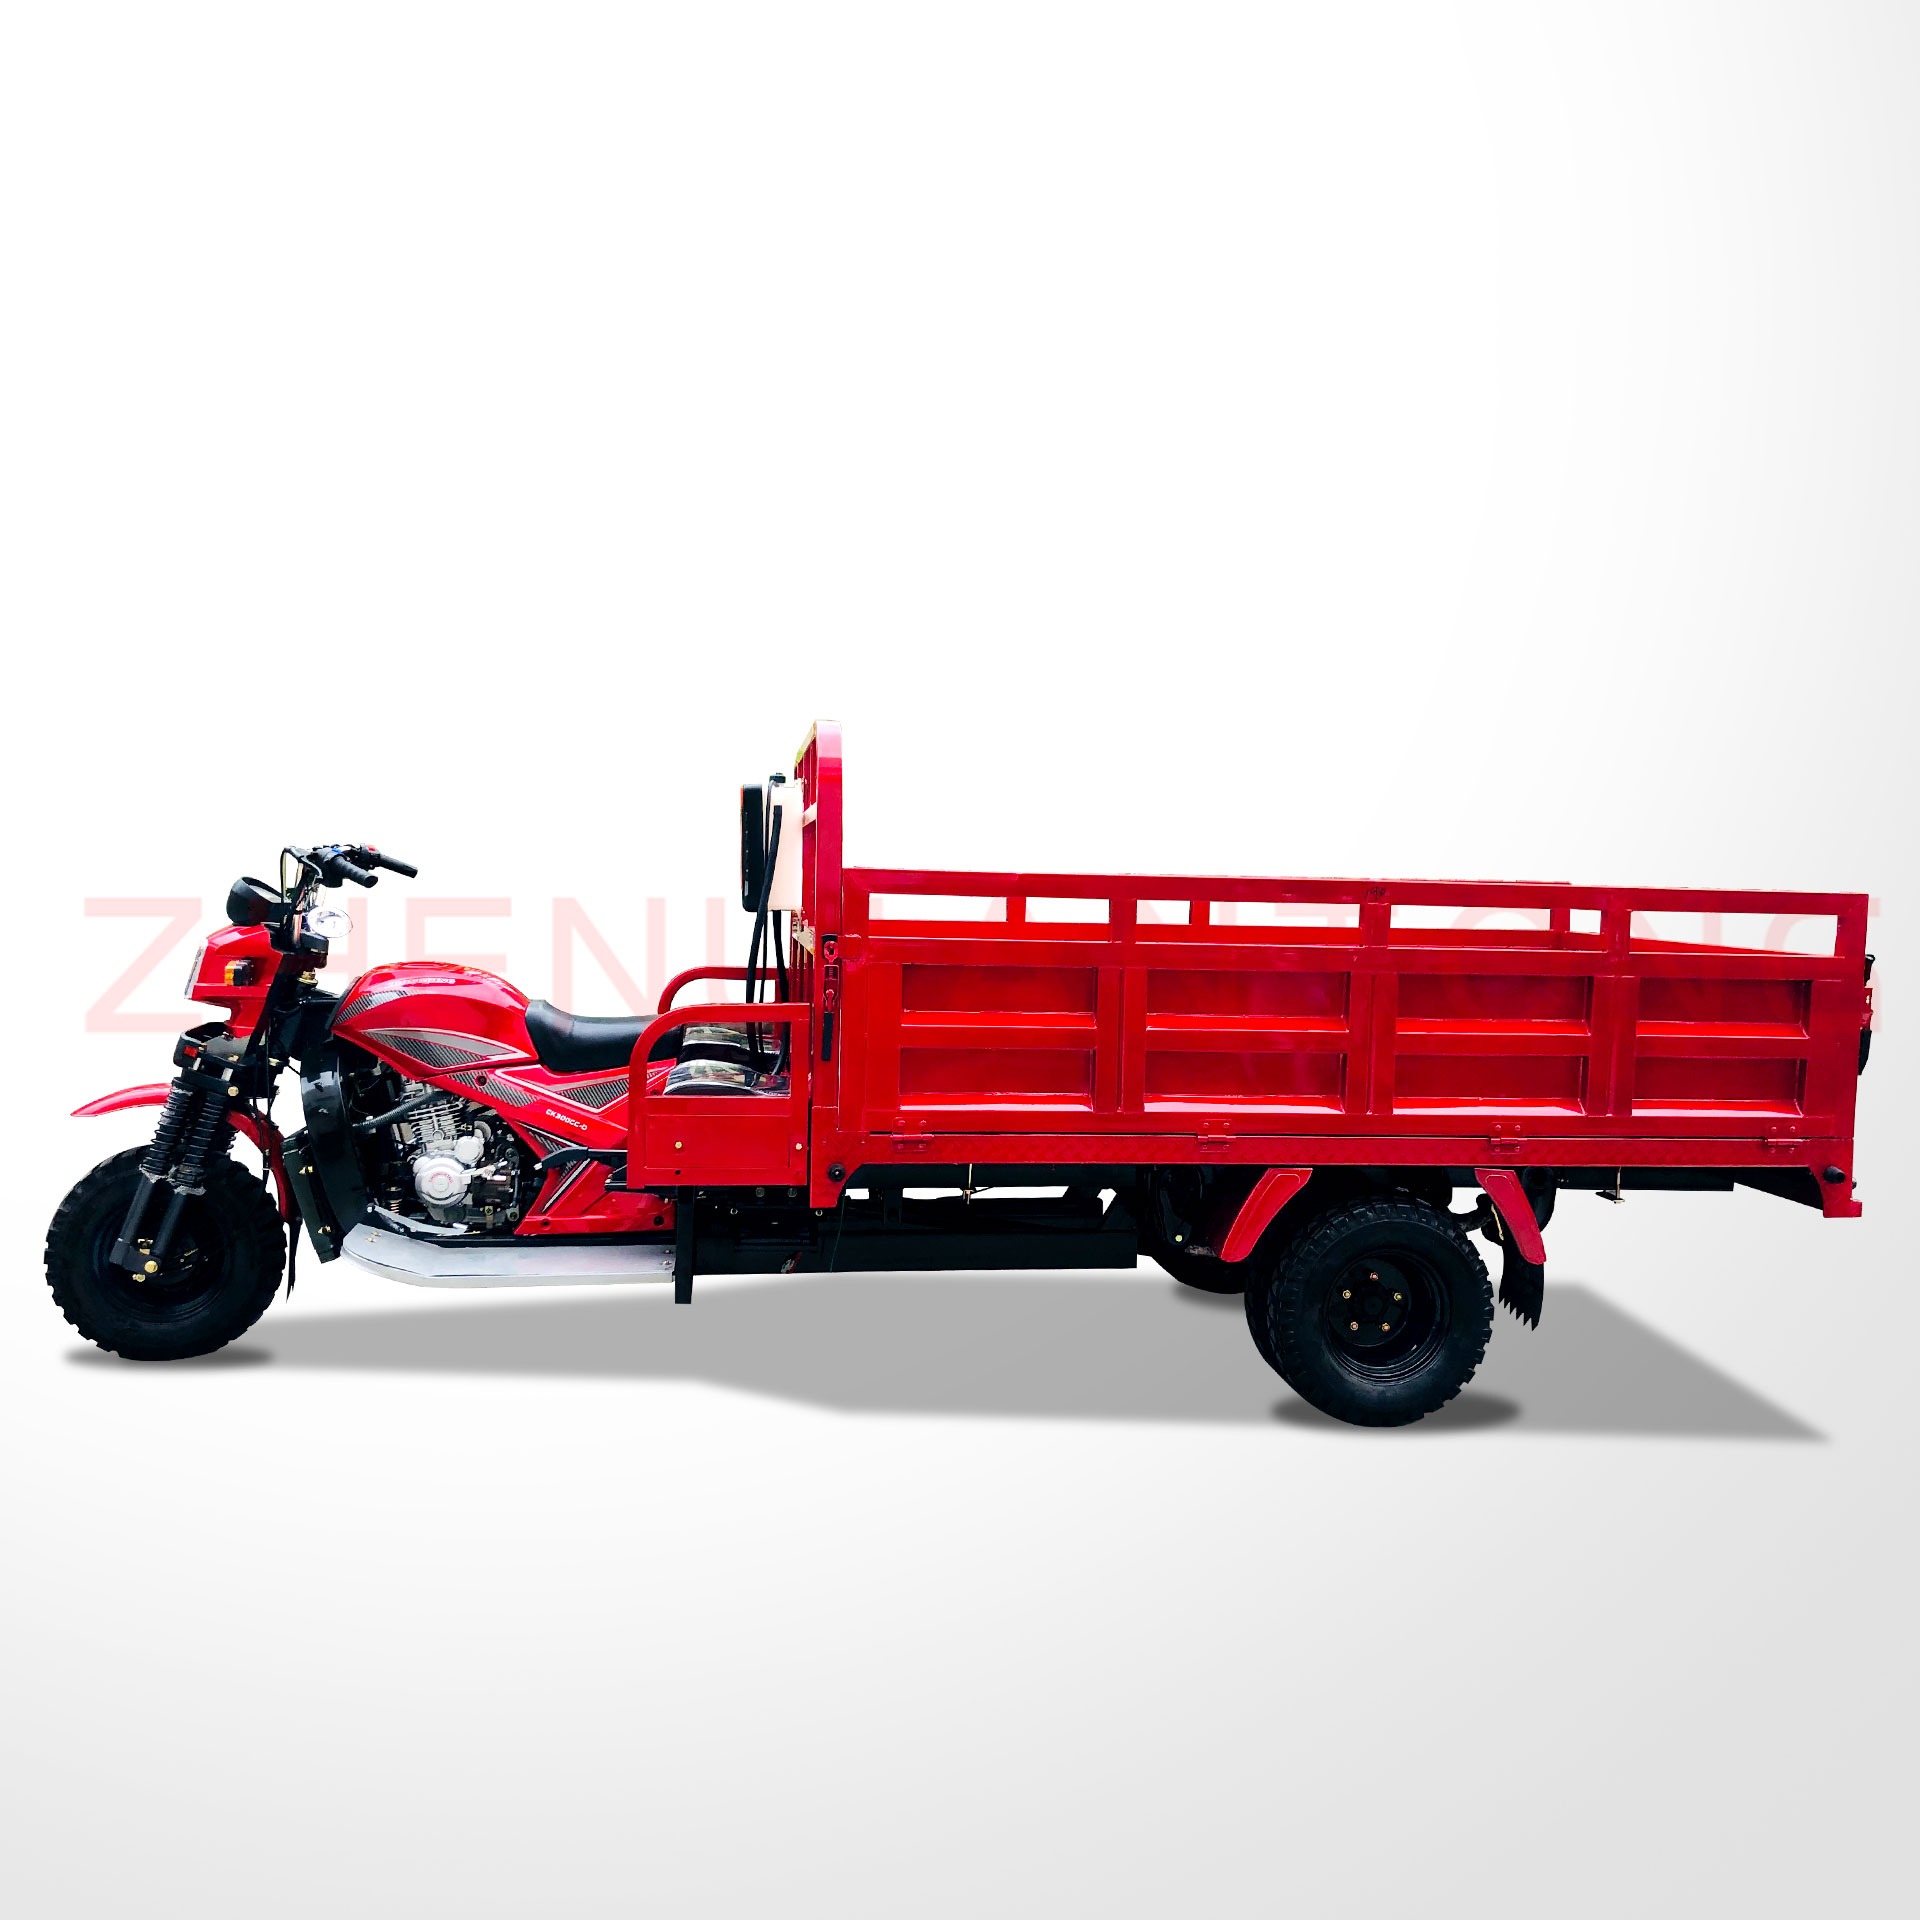 DY5-1 Heavy loading cargo tricycle with big cargo and powerful engine of 200cc/250cc/300cc